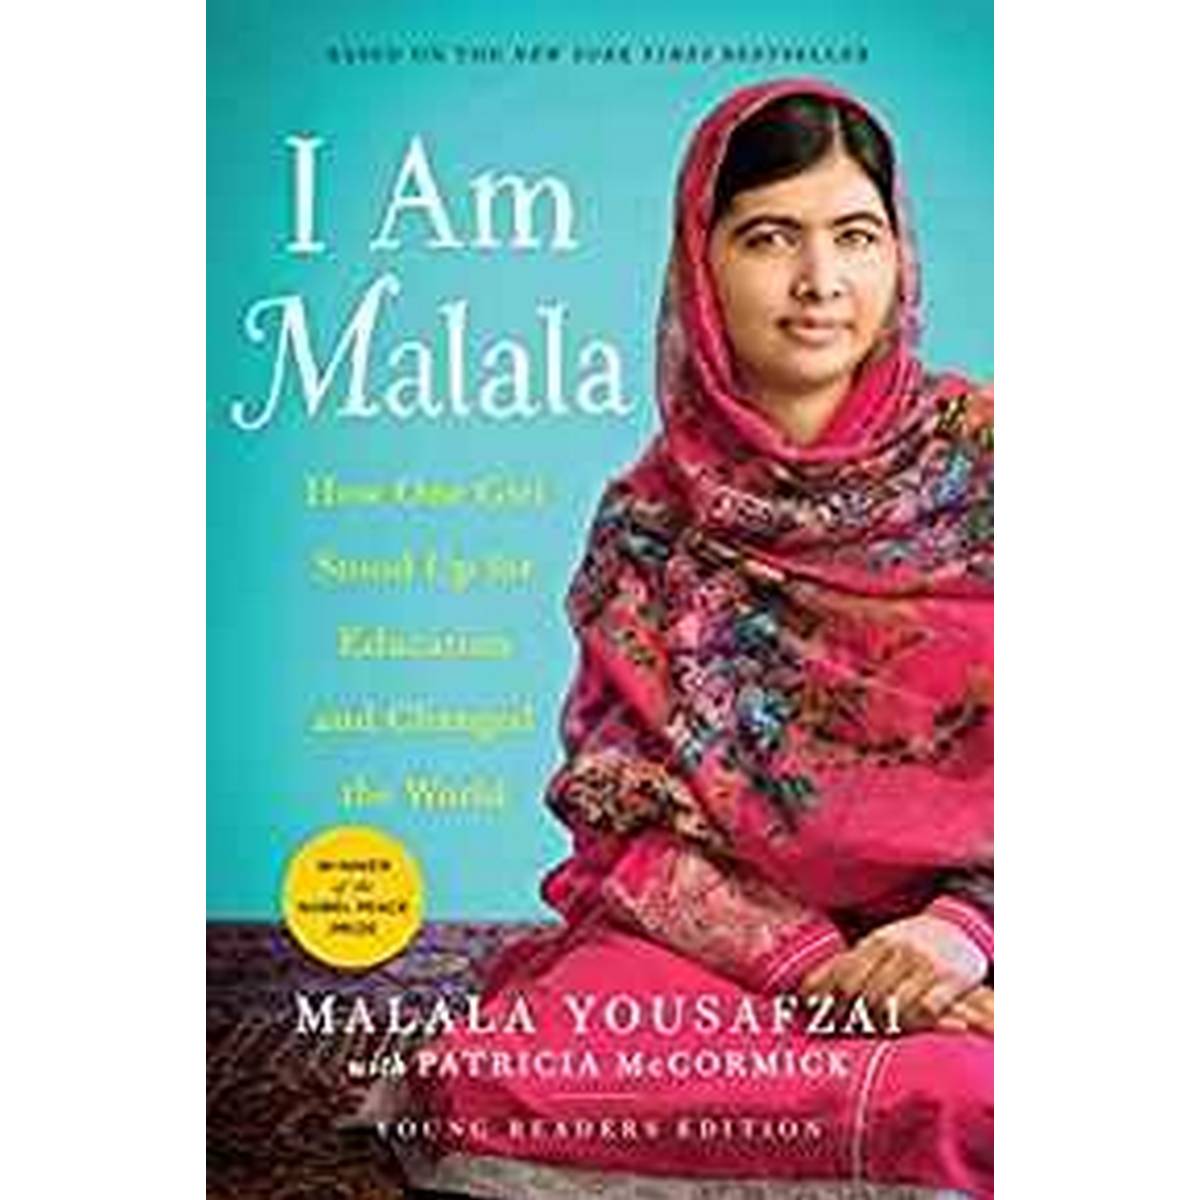 I Am Malala: The Girl Who Stood Up for Education and Changed the World